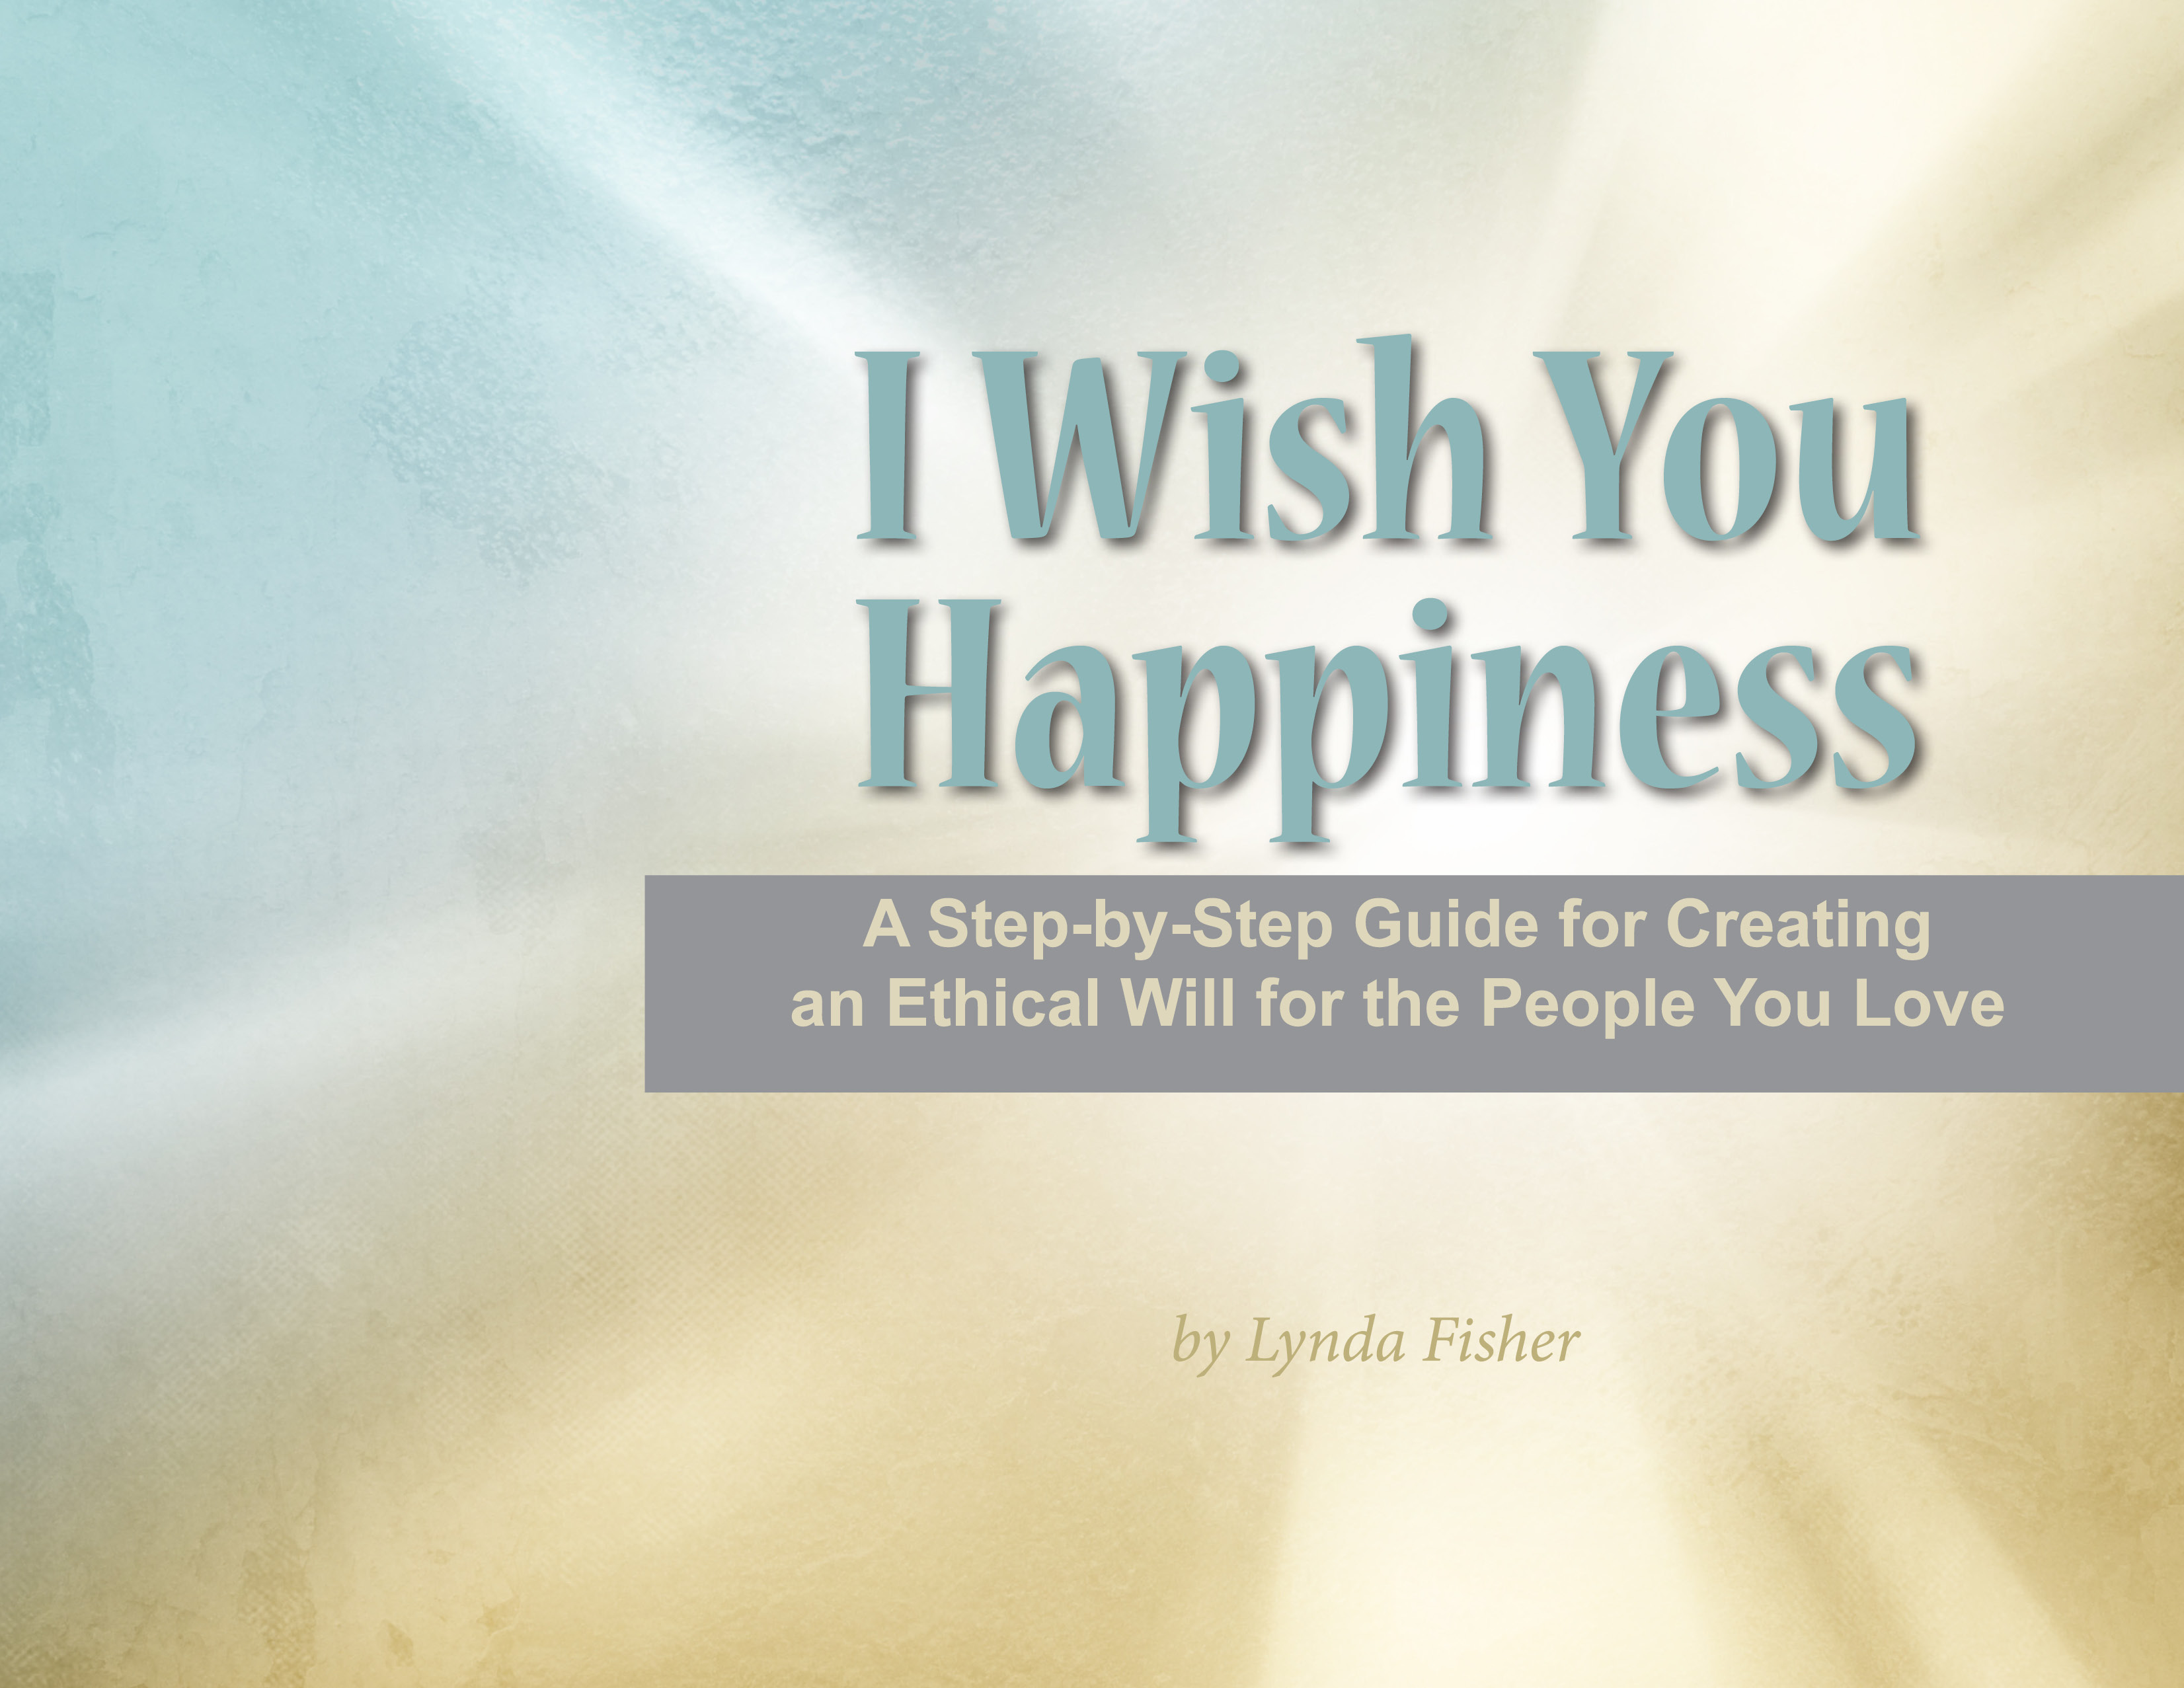 I Wish You Happiness: Creating an Ethical Will (Legacy Letter) for the People You Love